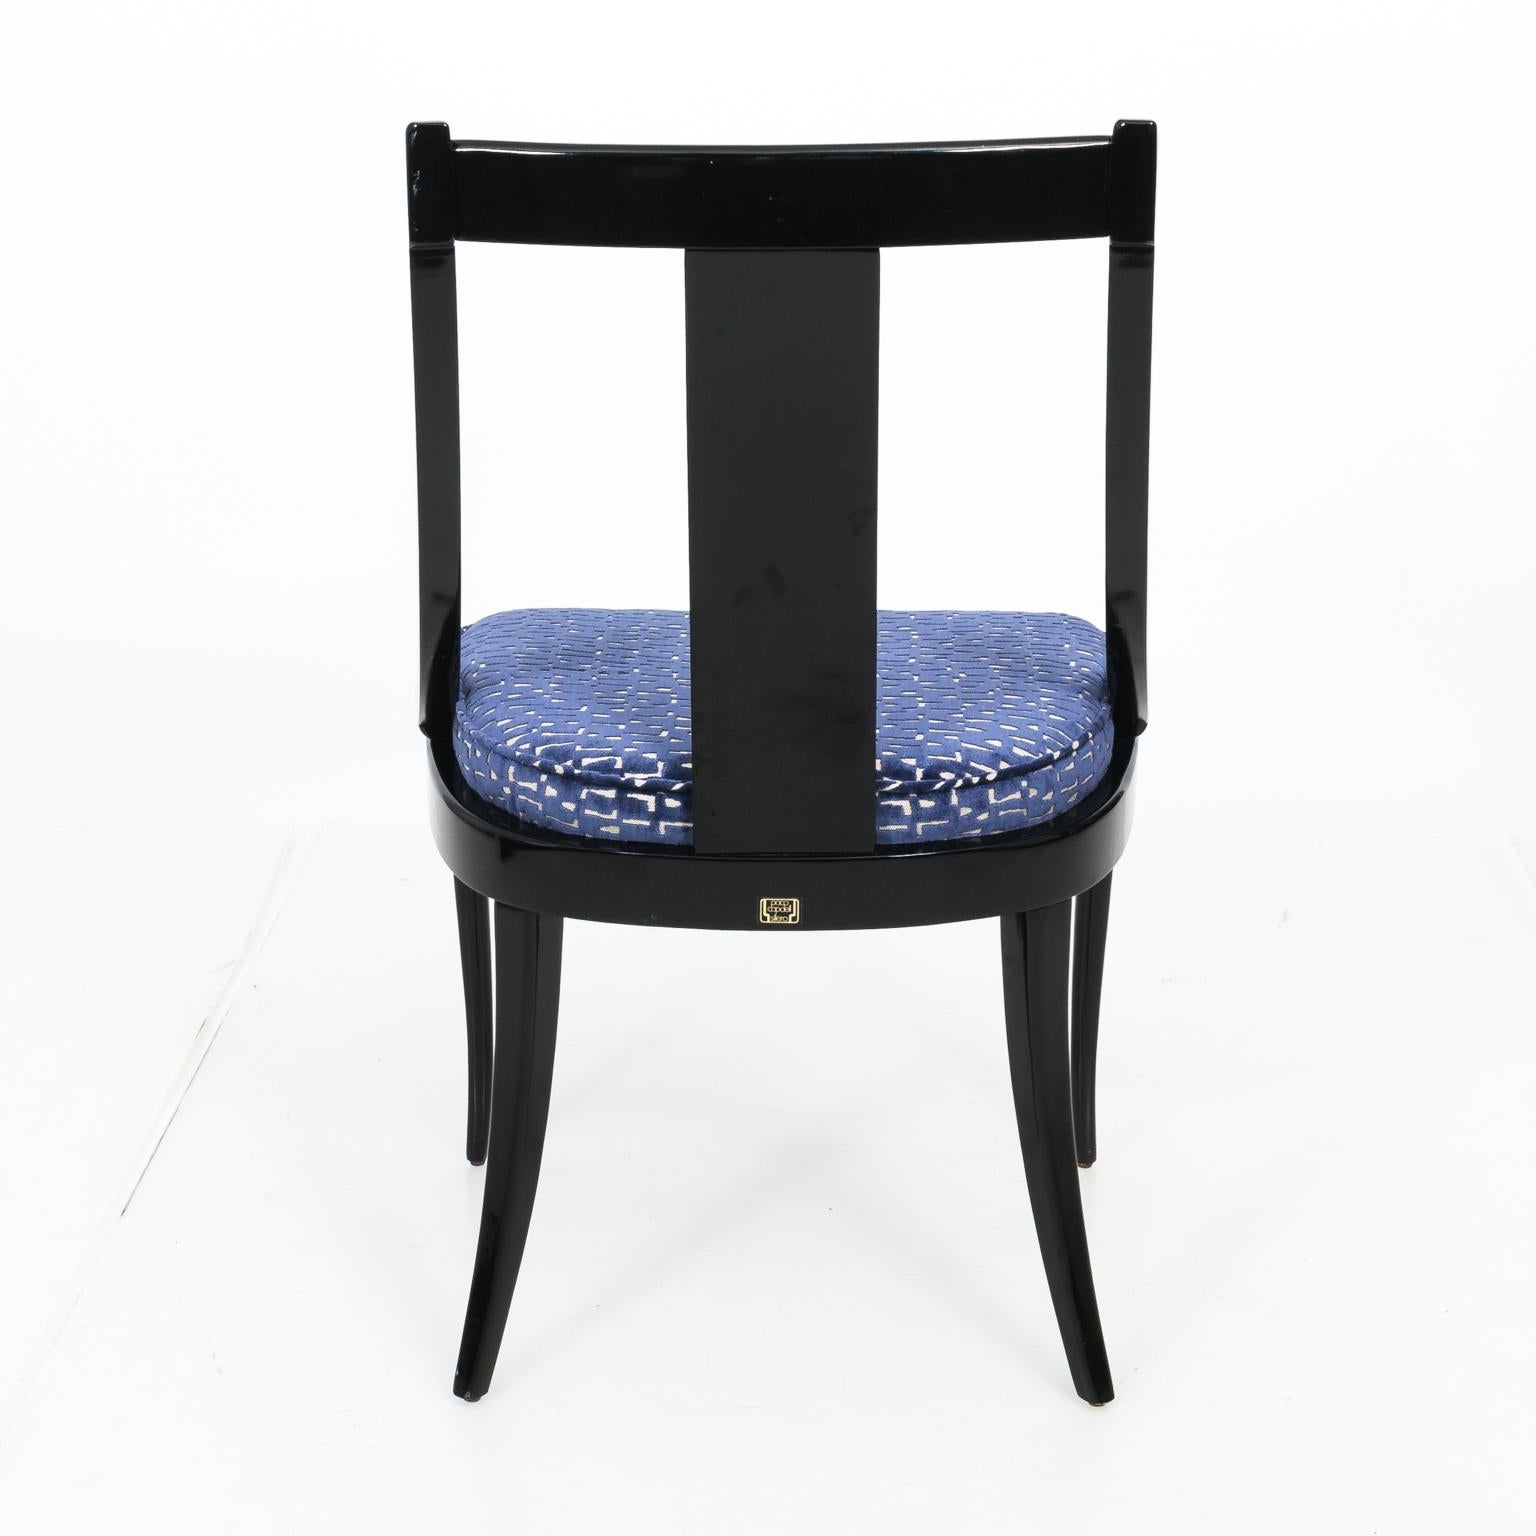 Black lacquer side chair by Paco Capdell Sillala, circa mid-20th century. Newly upholstered in blue velvet boxed cushion.